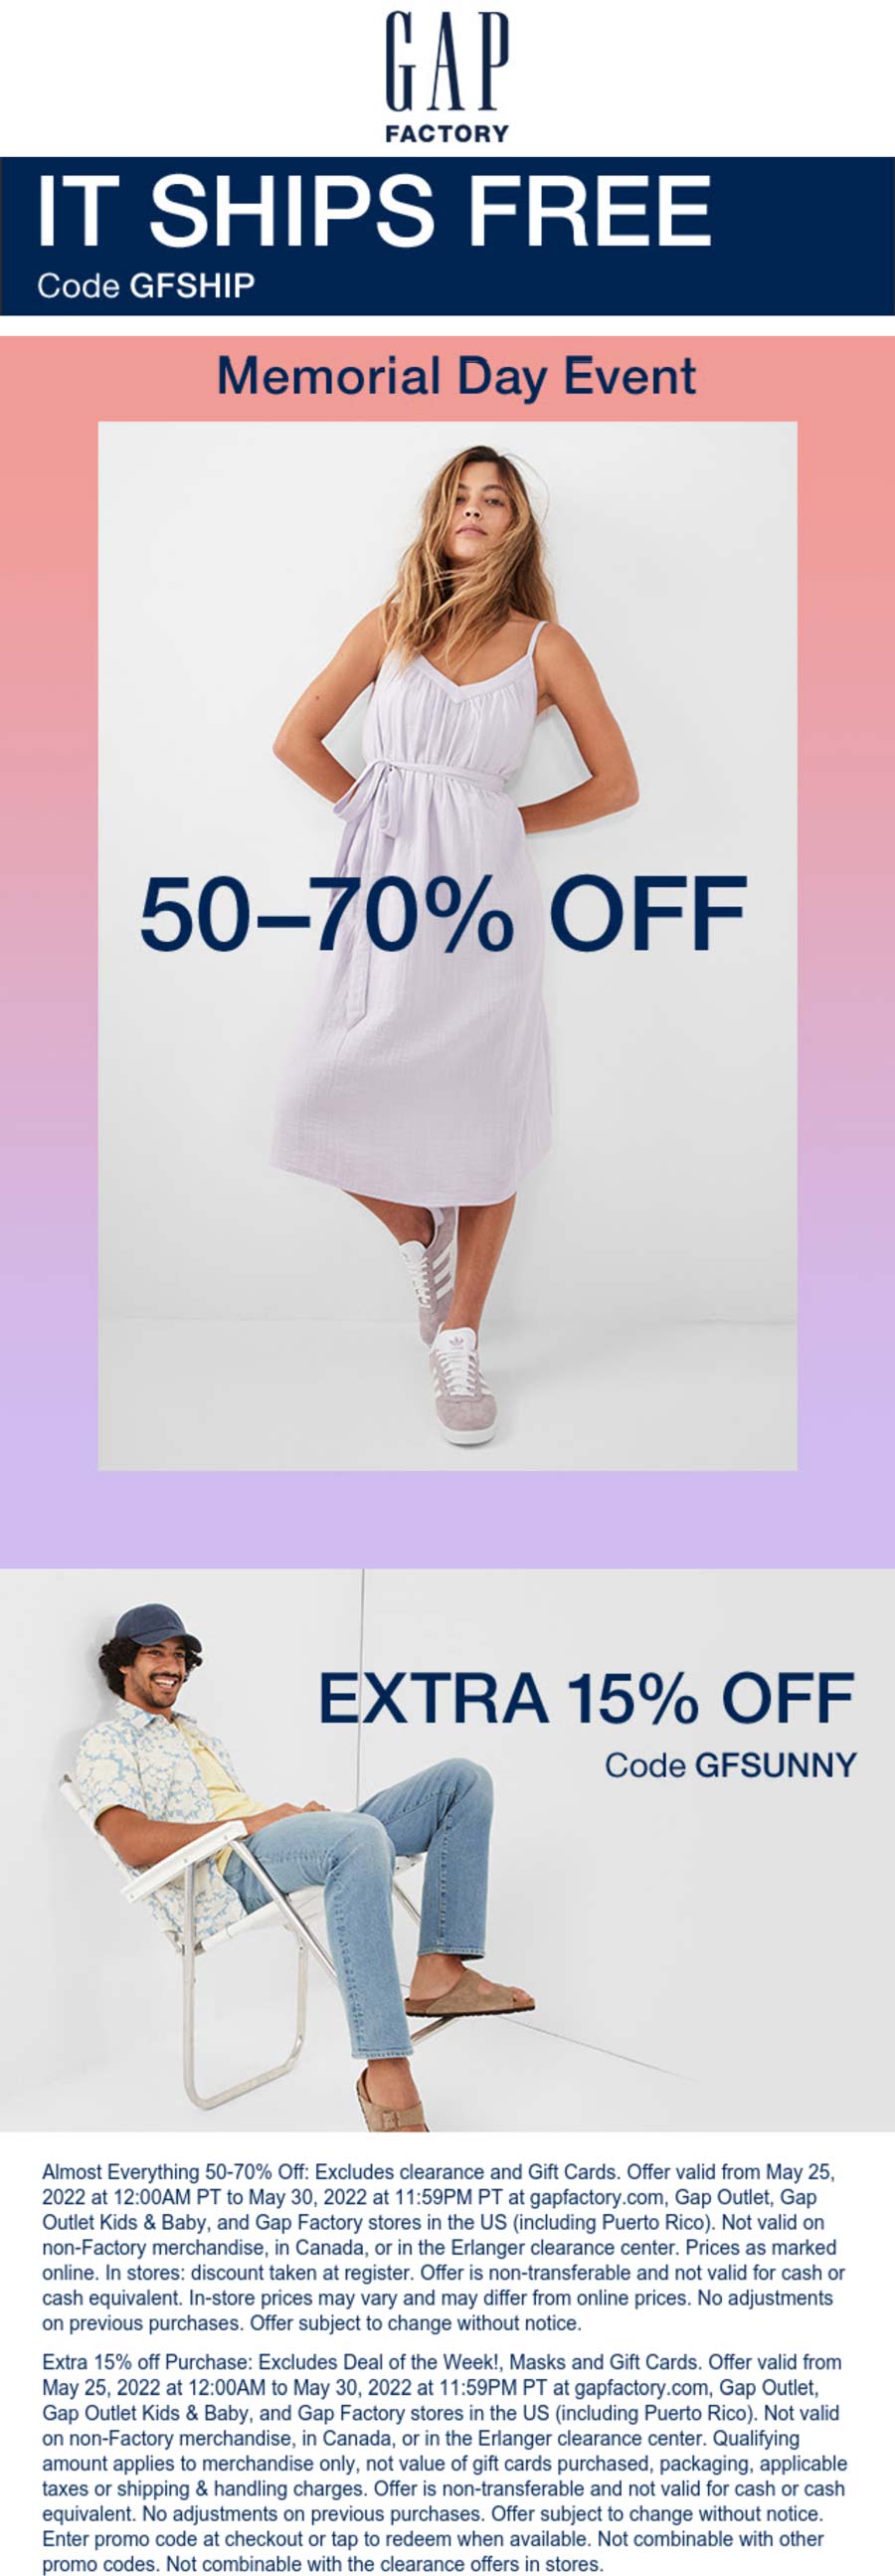 Gap Factory coupons & promo code for [February 2023]